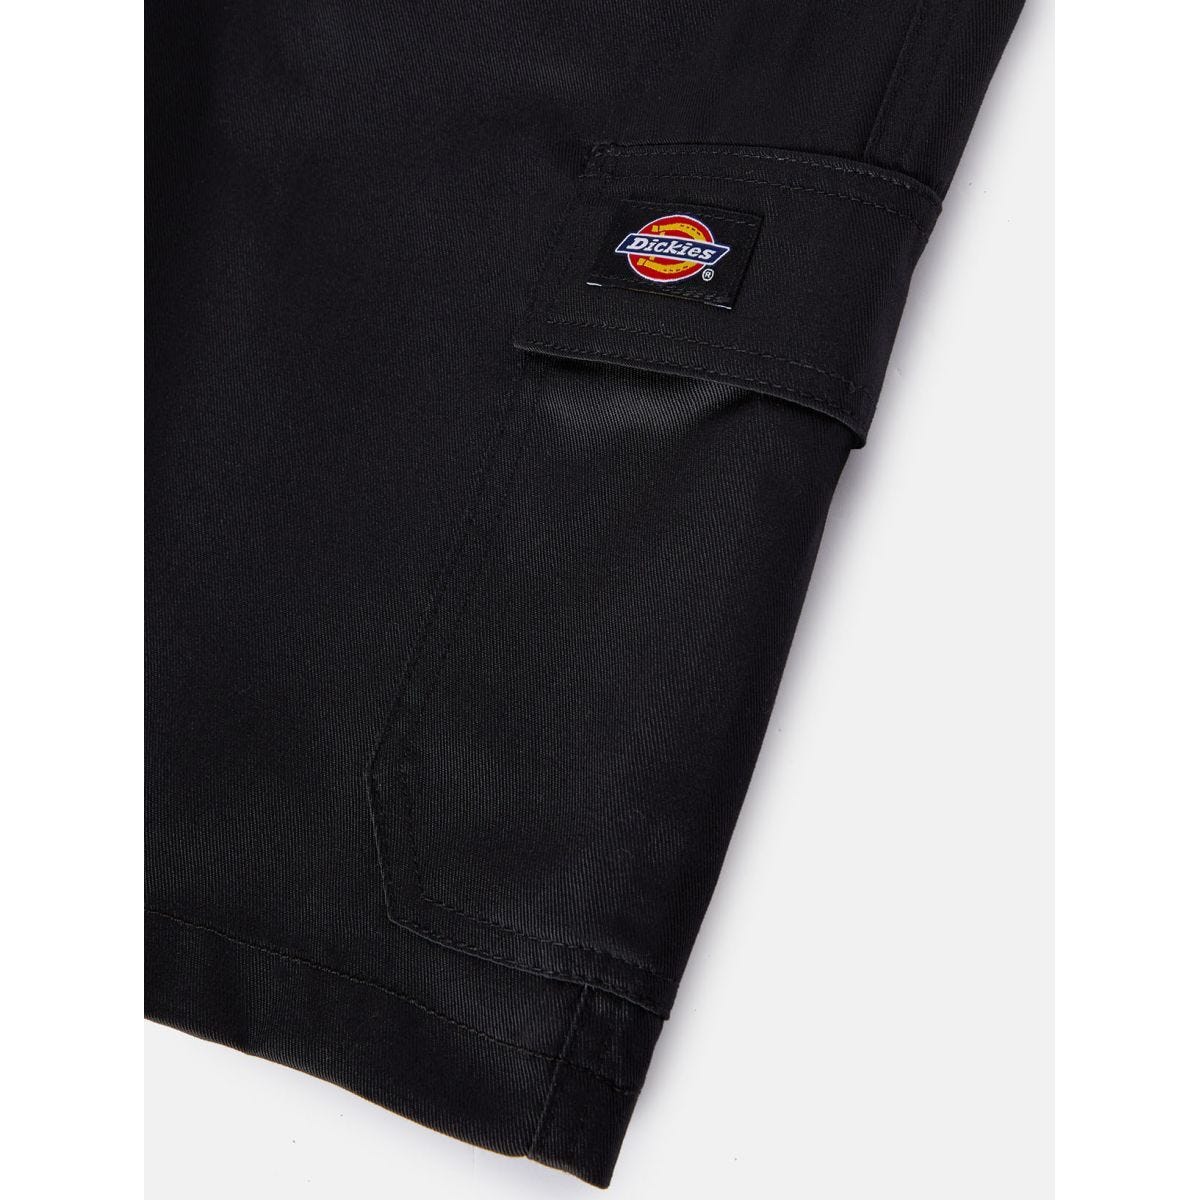 Short Everyday Noir - Dickies - Taille 44 4